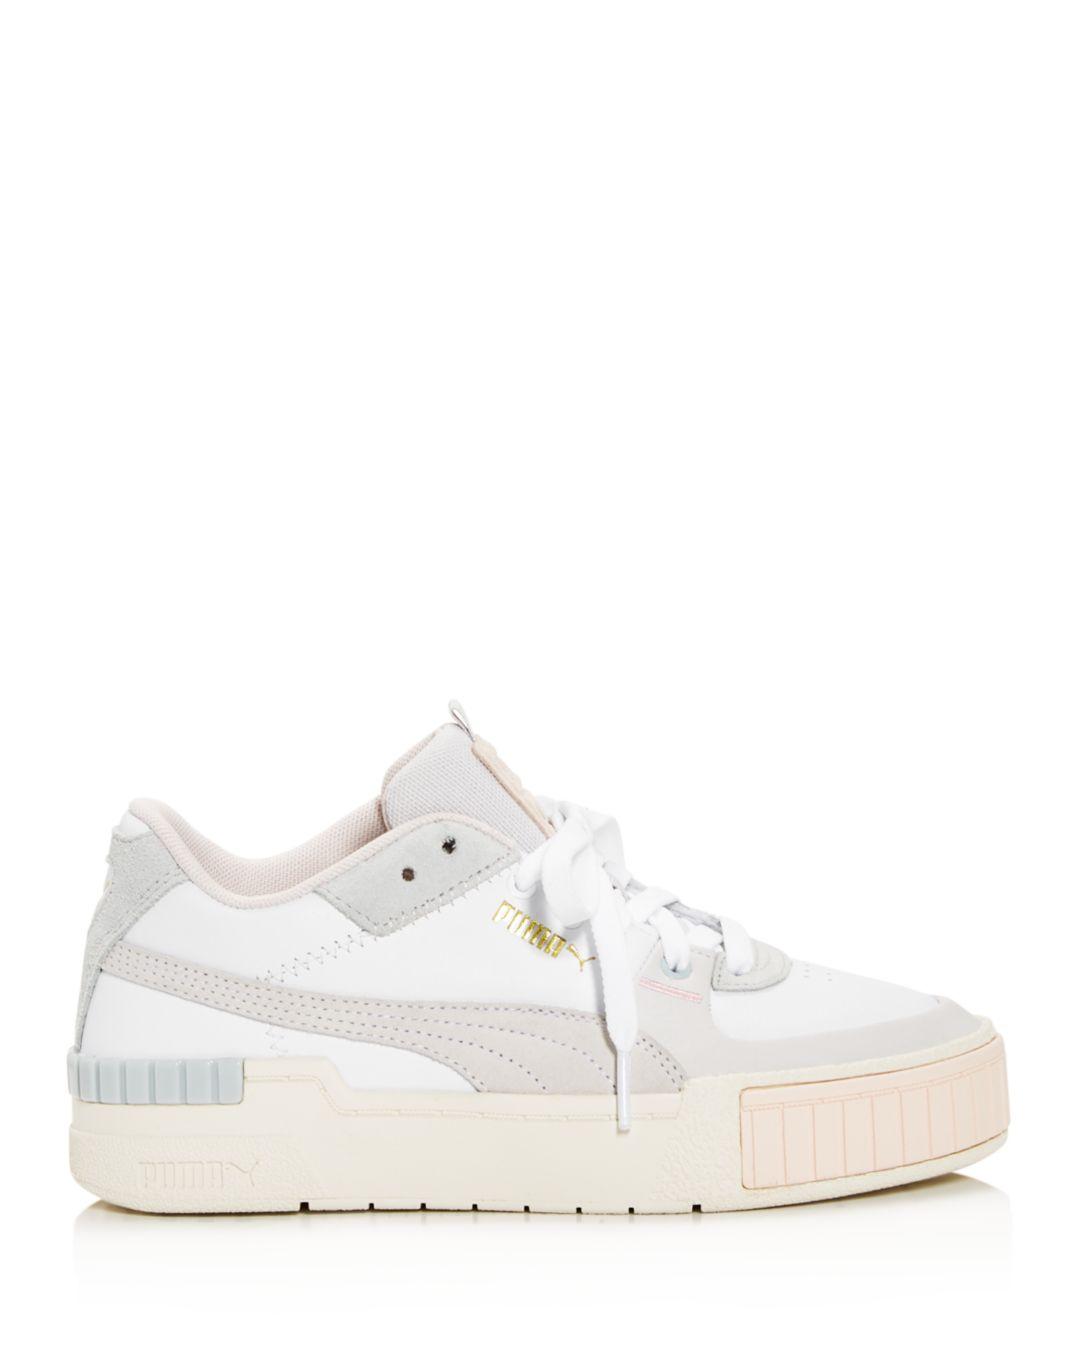 PUMA Leather Cali Sport Mix Shoes in White - Lyst